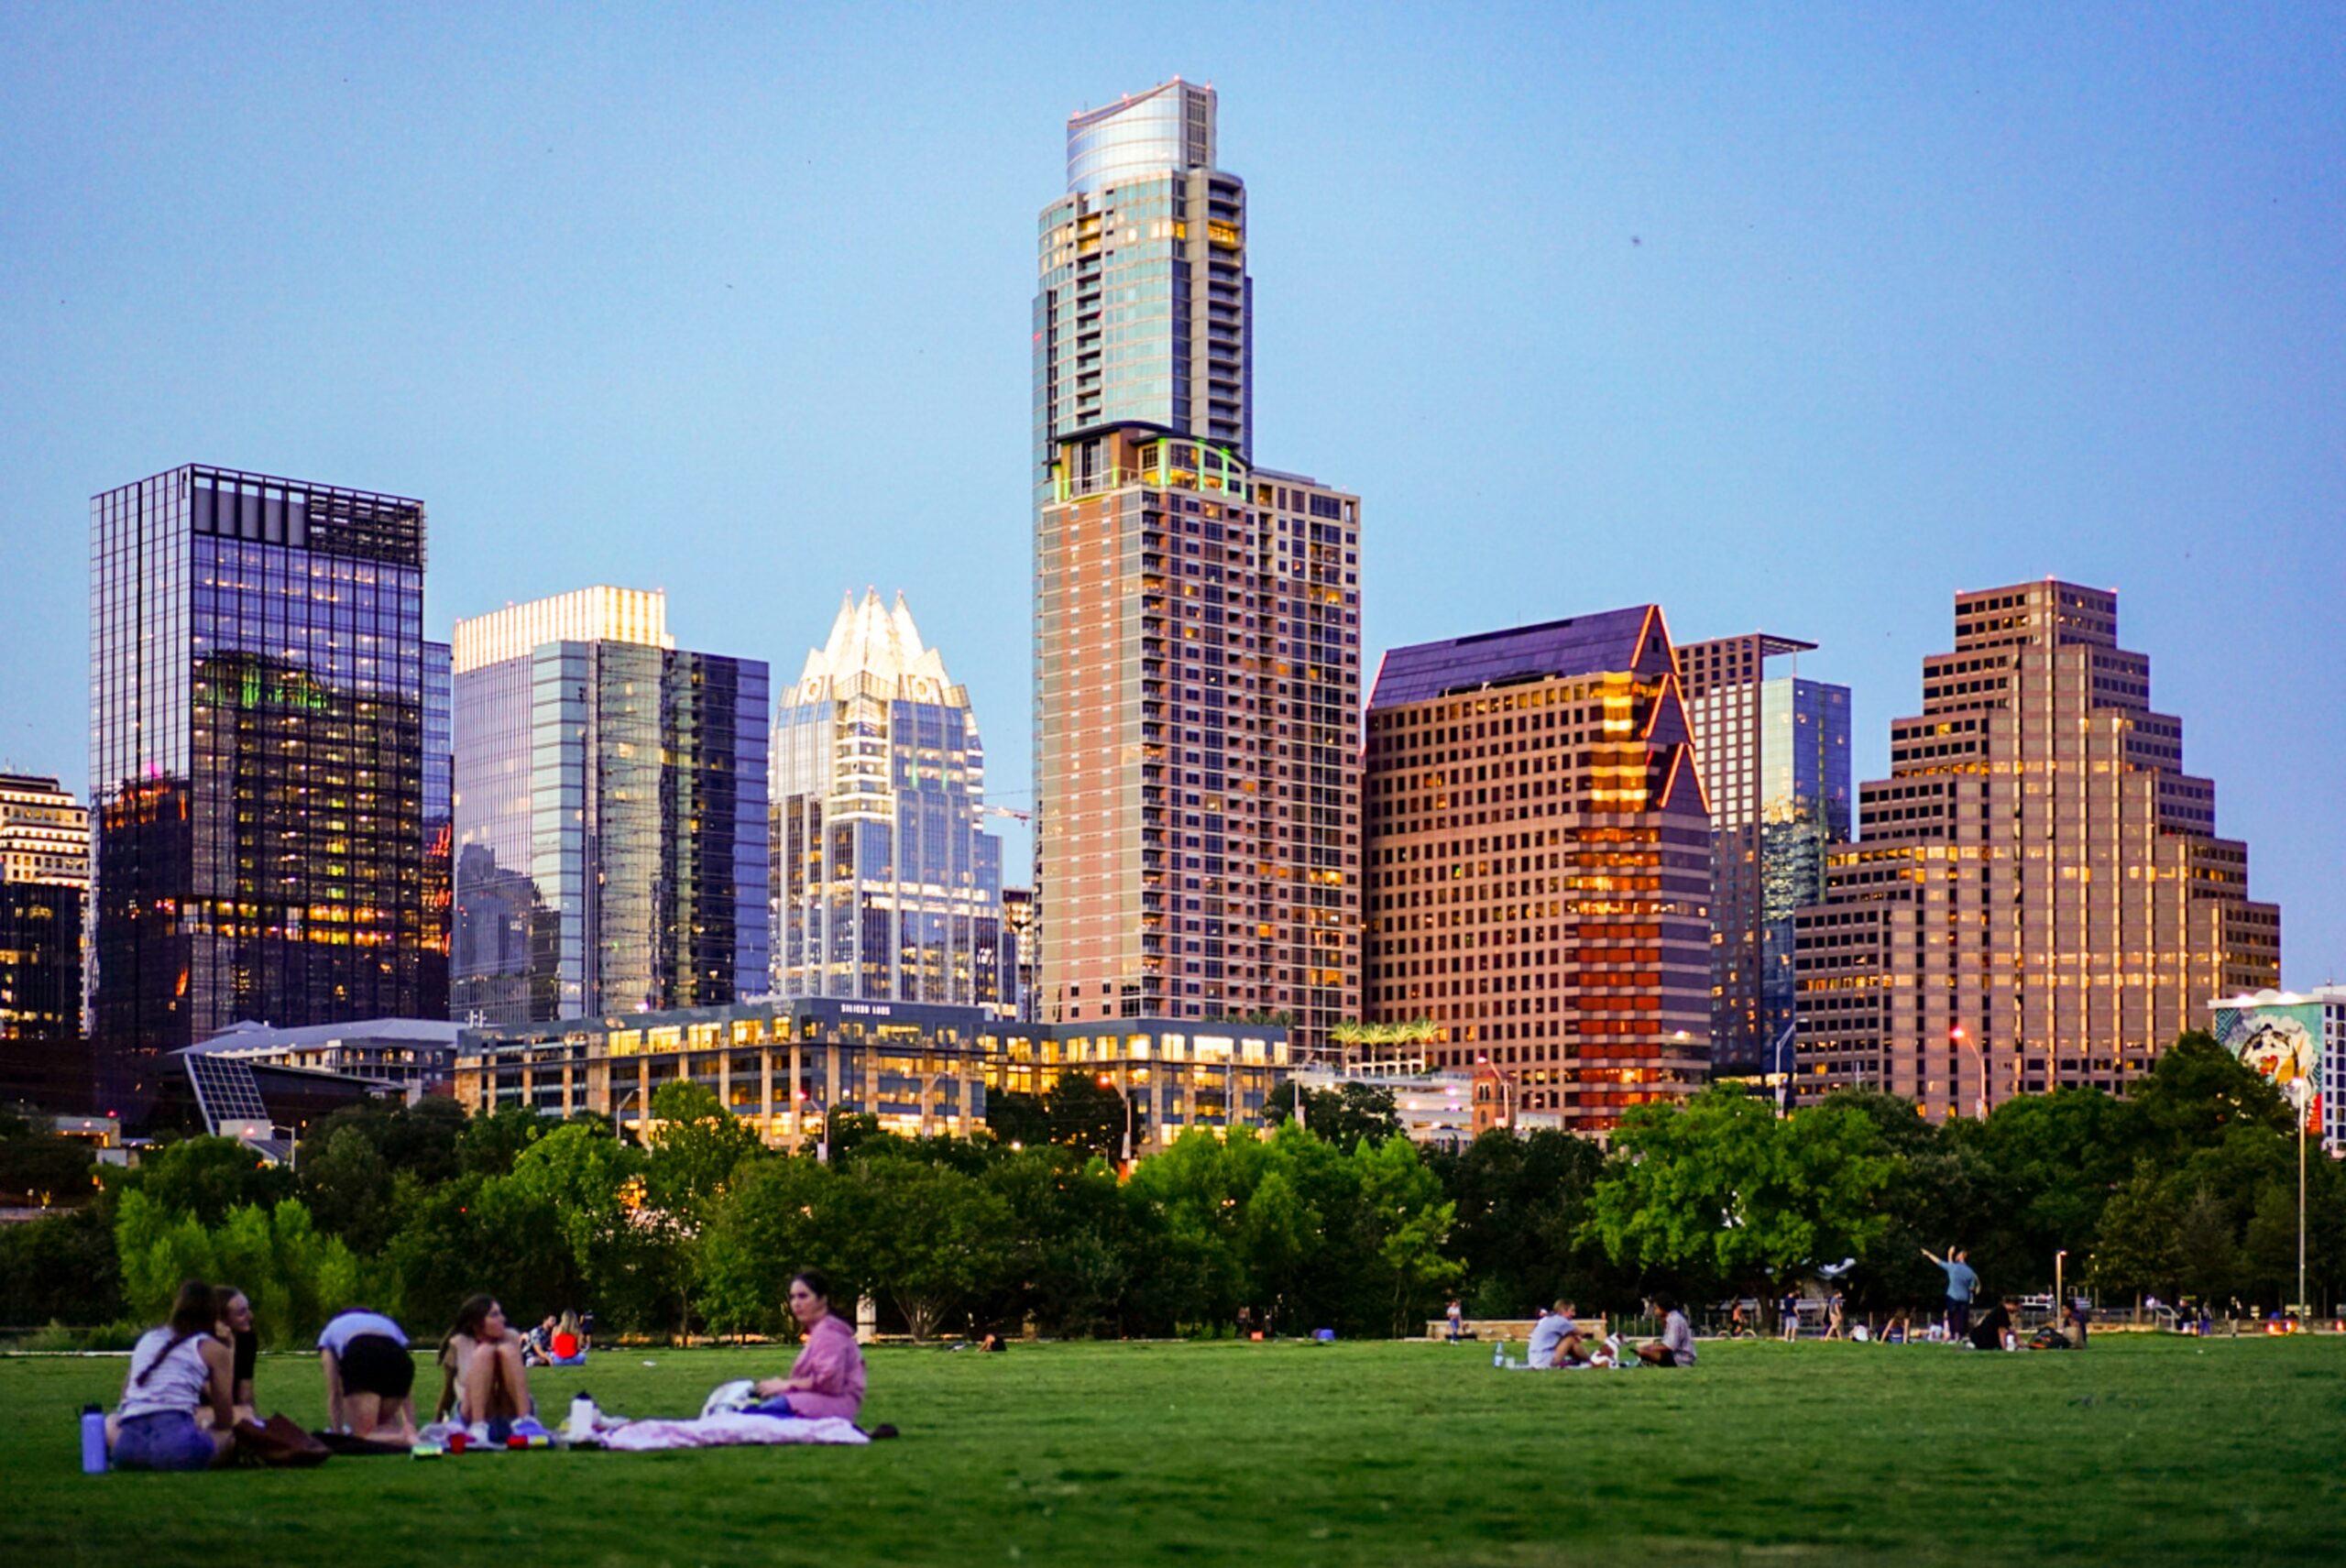 A group of people sitting on a grassy field in front of the Austin skyline, full of businesses relying on outsourced IT services.